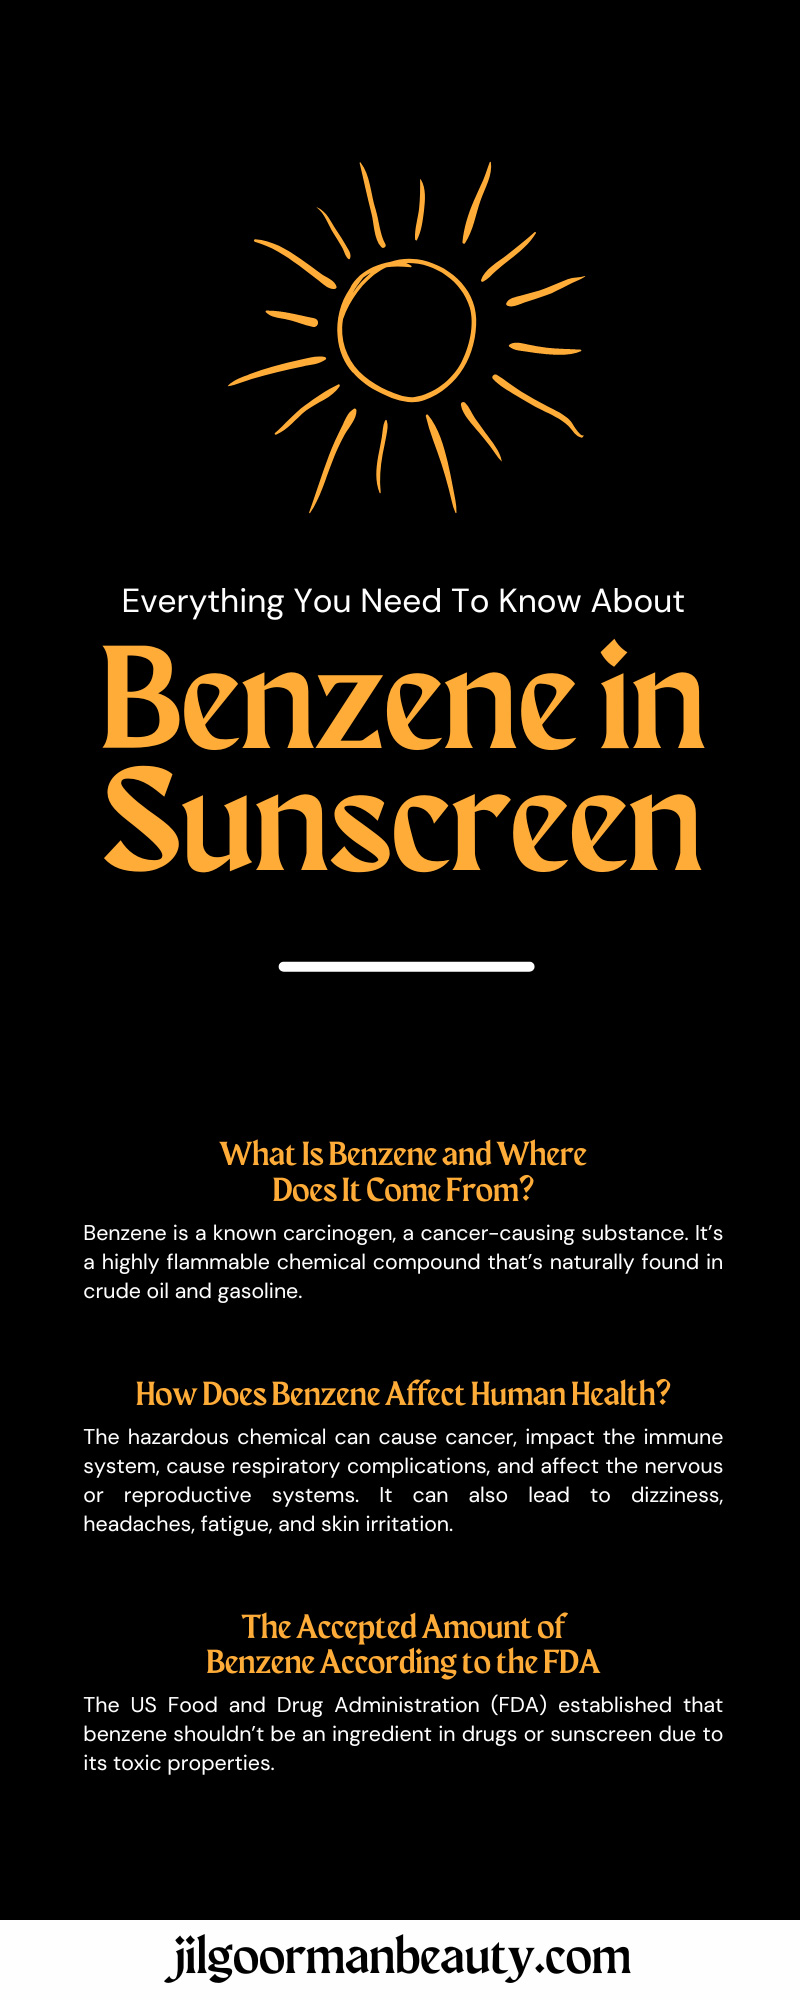 Everything You Need To Know About Benzene in Sunscreen